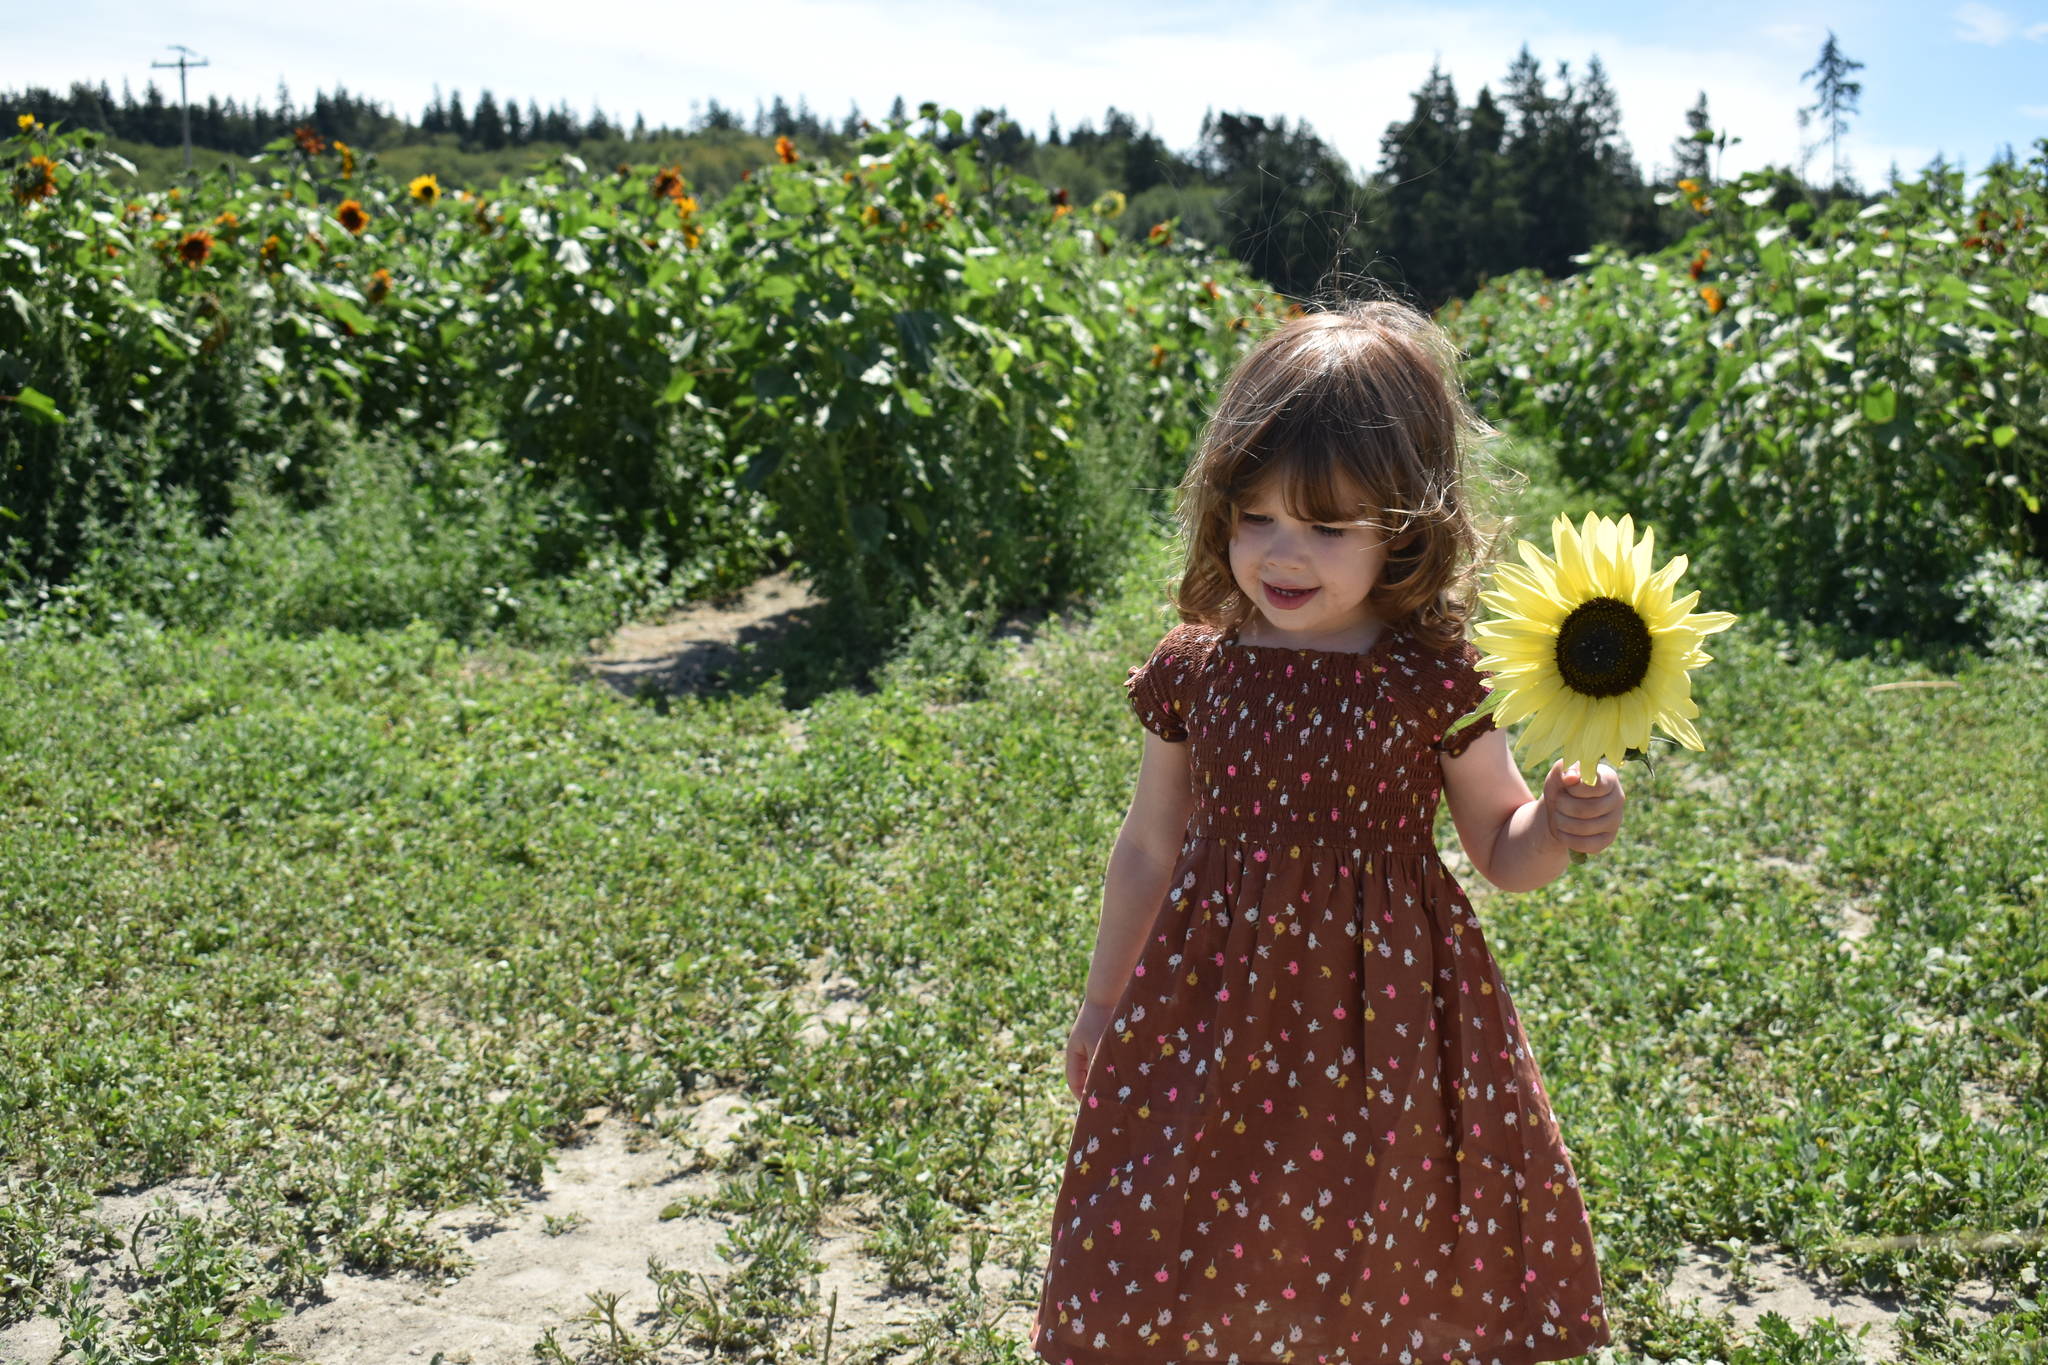 Photo by Emily Gilbert/Whidbey News-Times
Three-year-old Delilah Hunziker found a butter yellow sunflower at K & R Farms on North Whidbey.